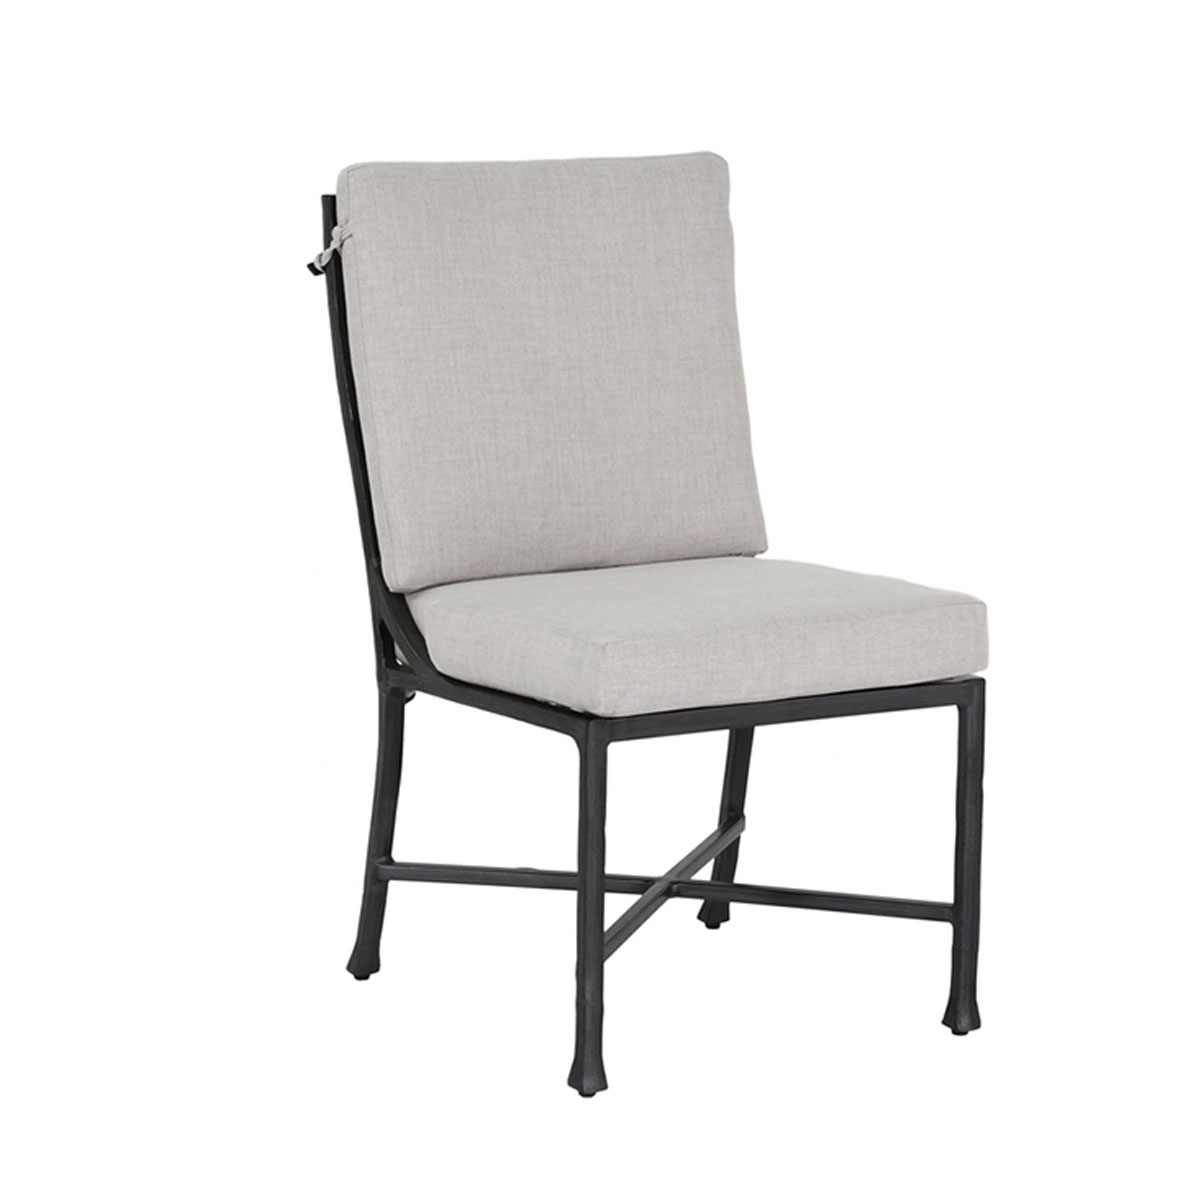 Castelle Marquis Formal Armless Dining Chair